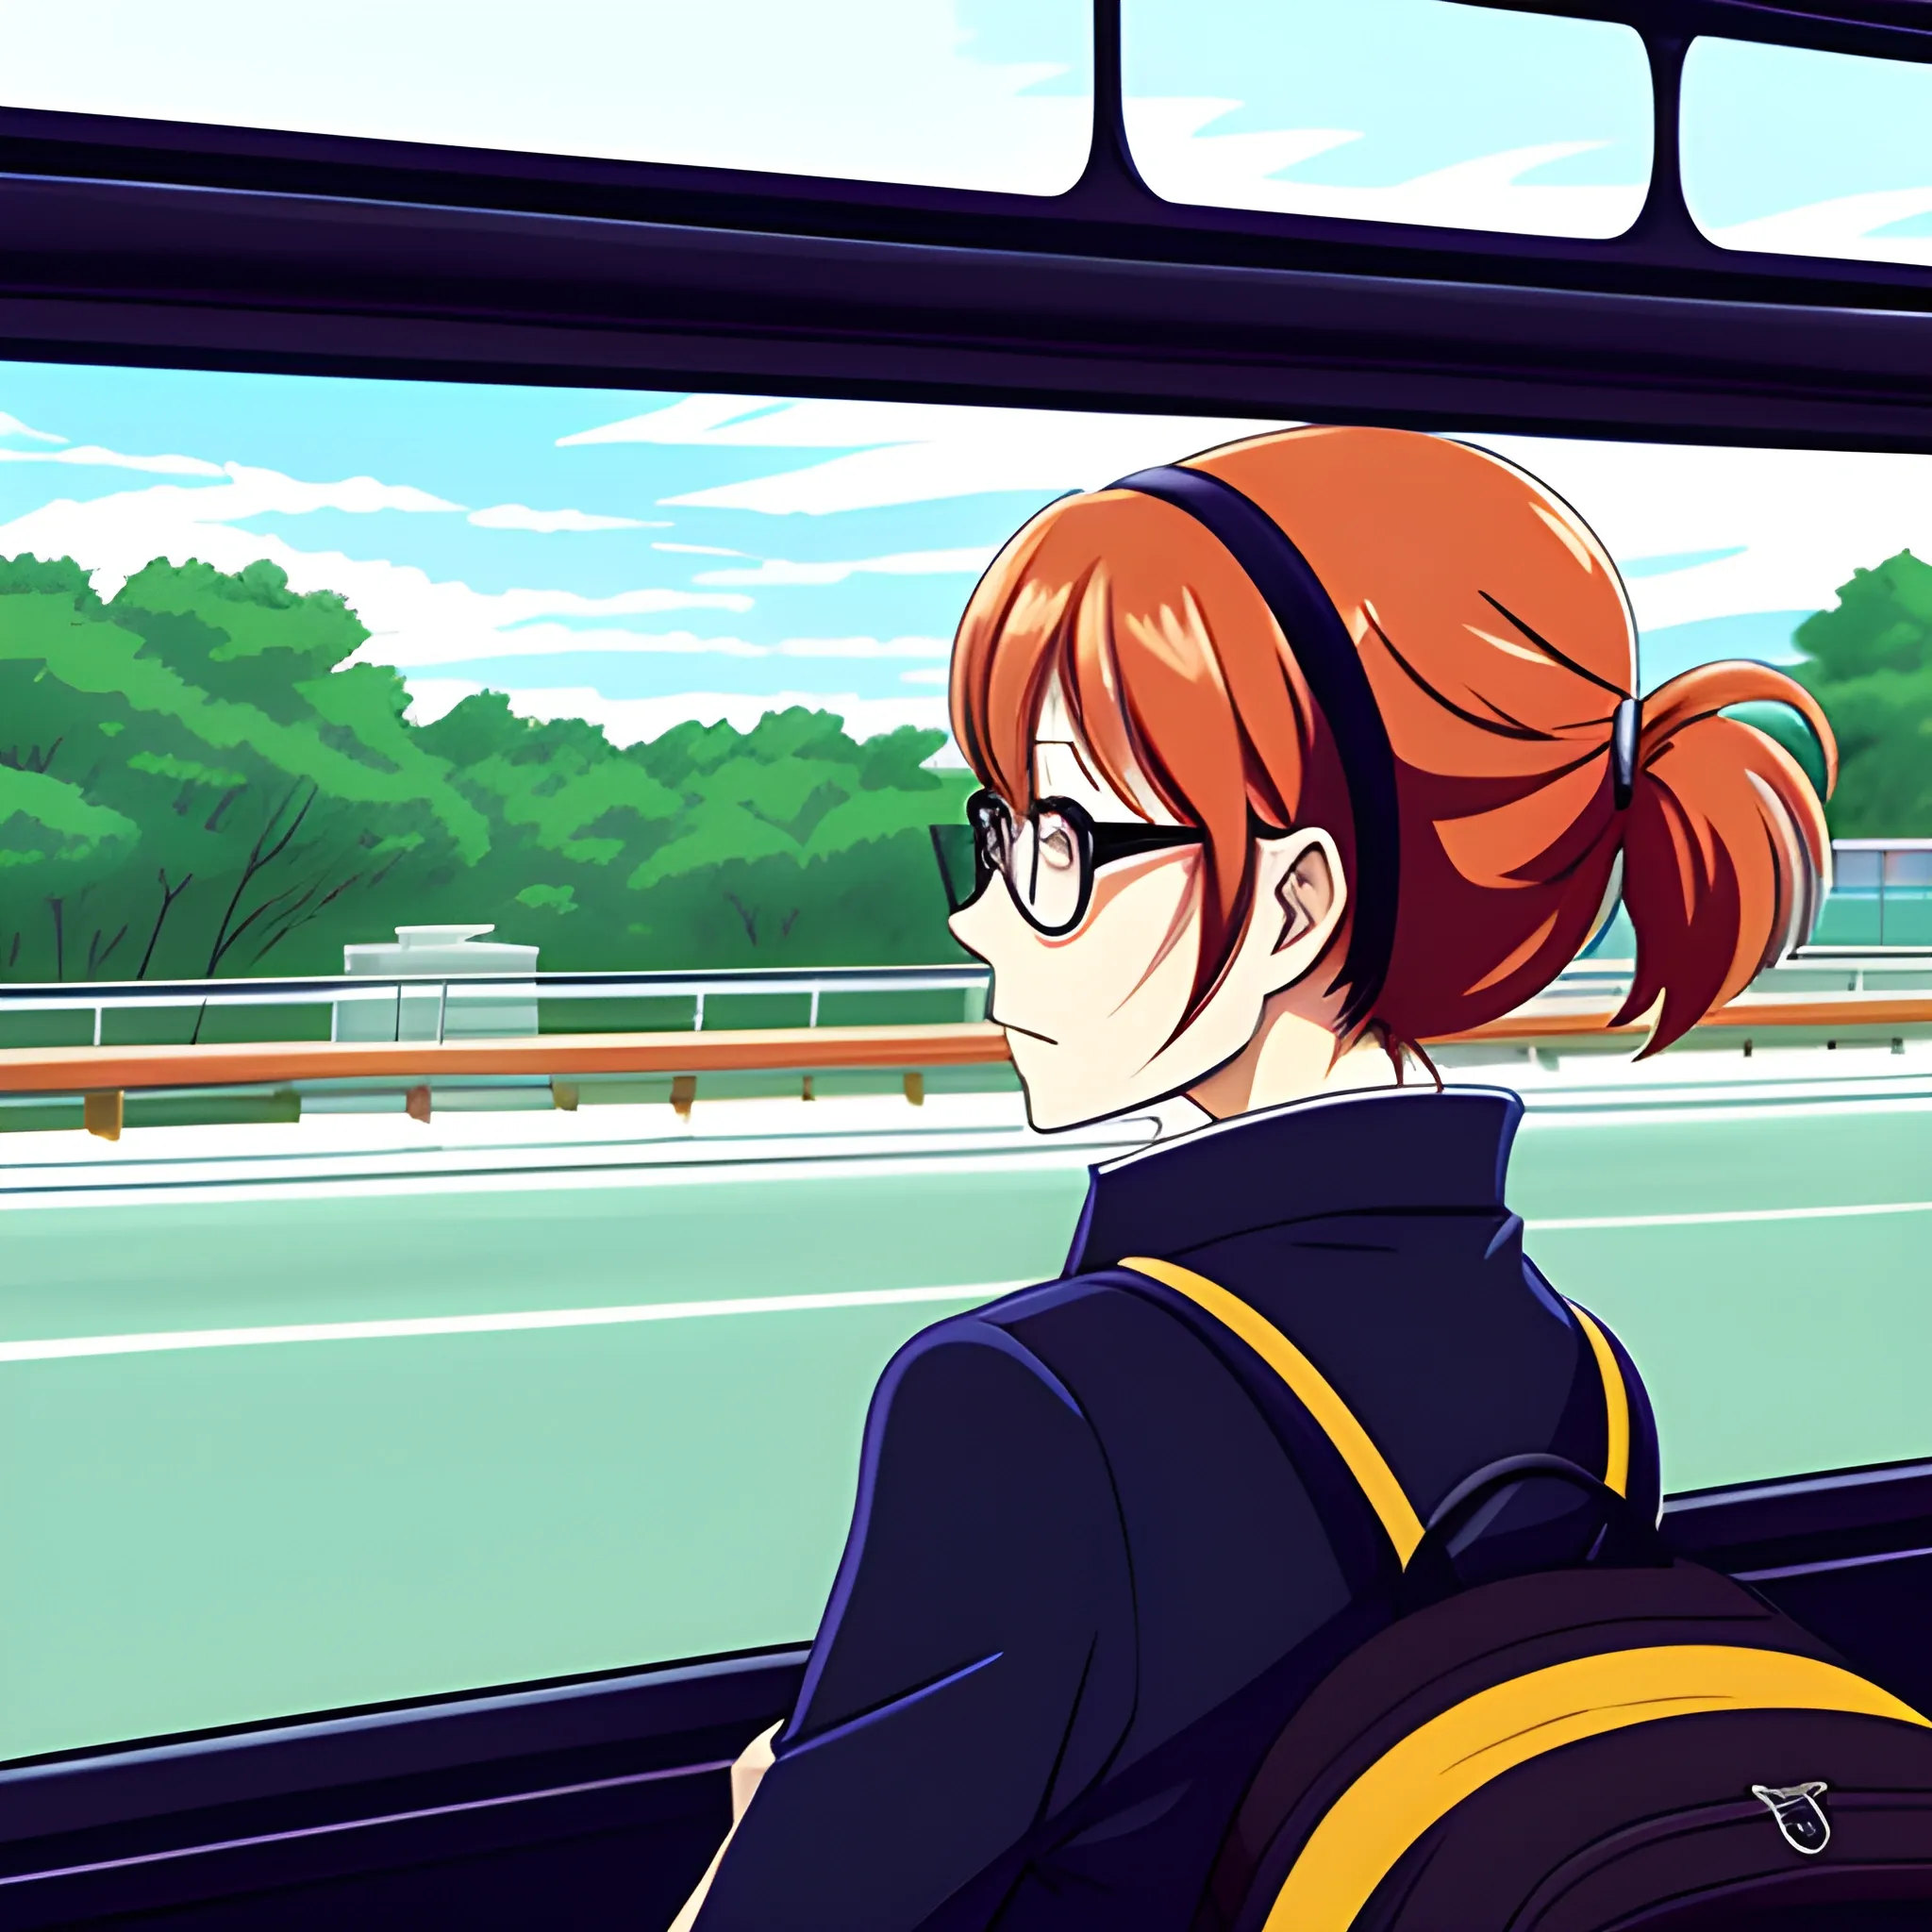 As the bus rumbles down the road, an anime school girl gazes out the window, her mind filled with dreams of far-off places and new experiences